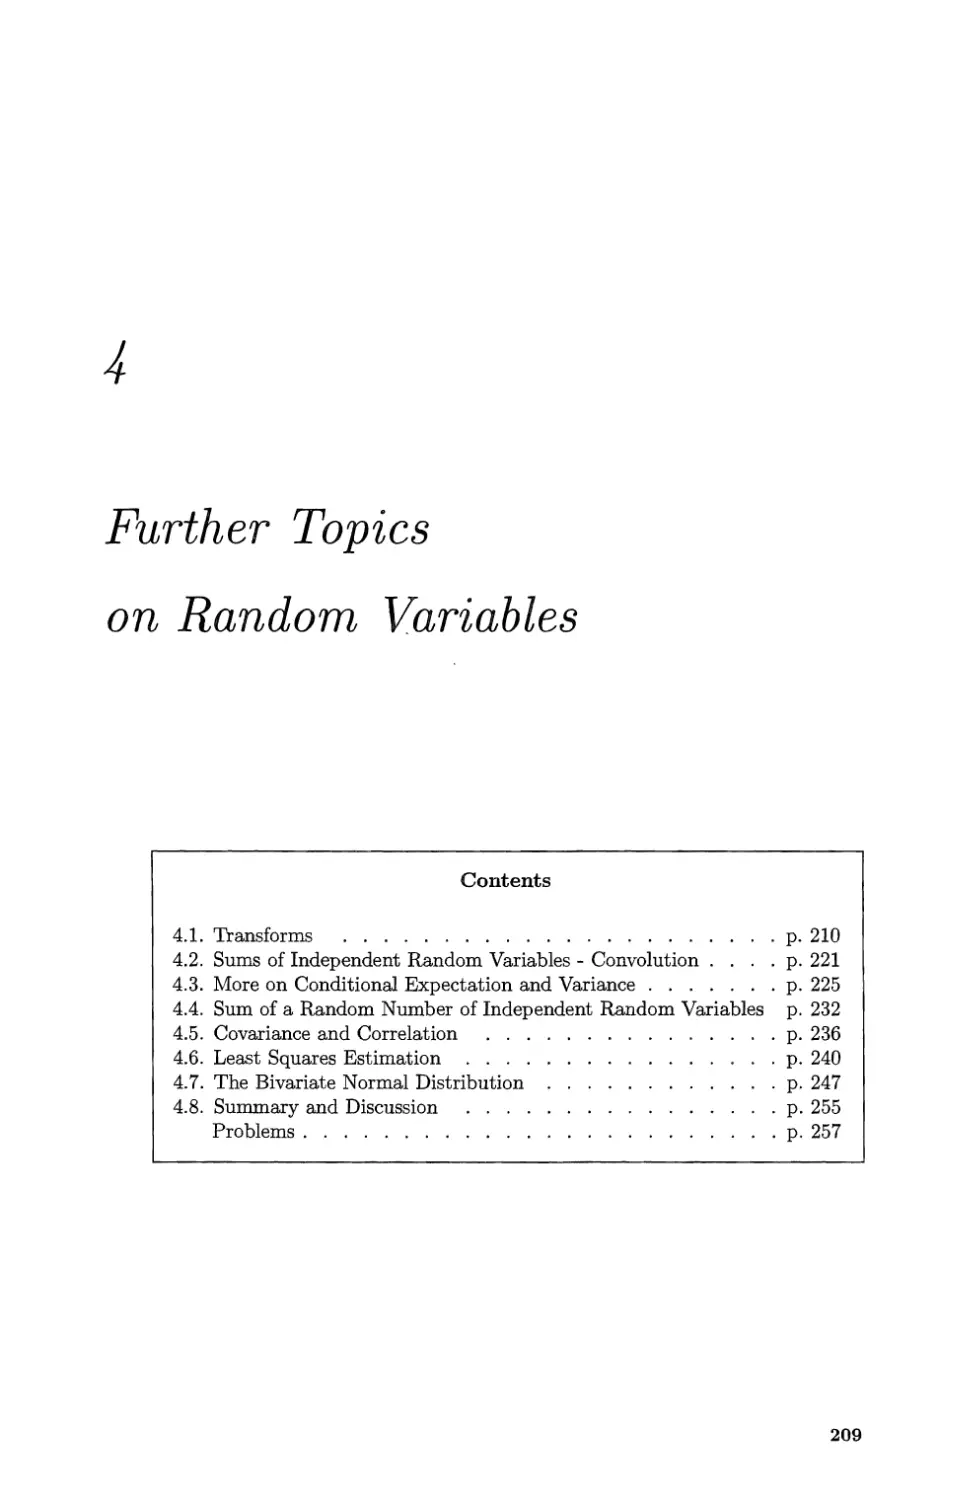 Chapter 4-Further Topics on Random Variables